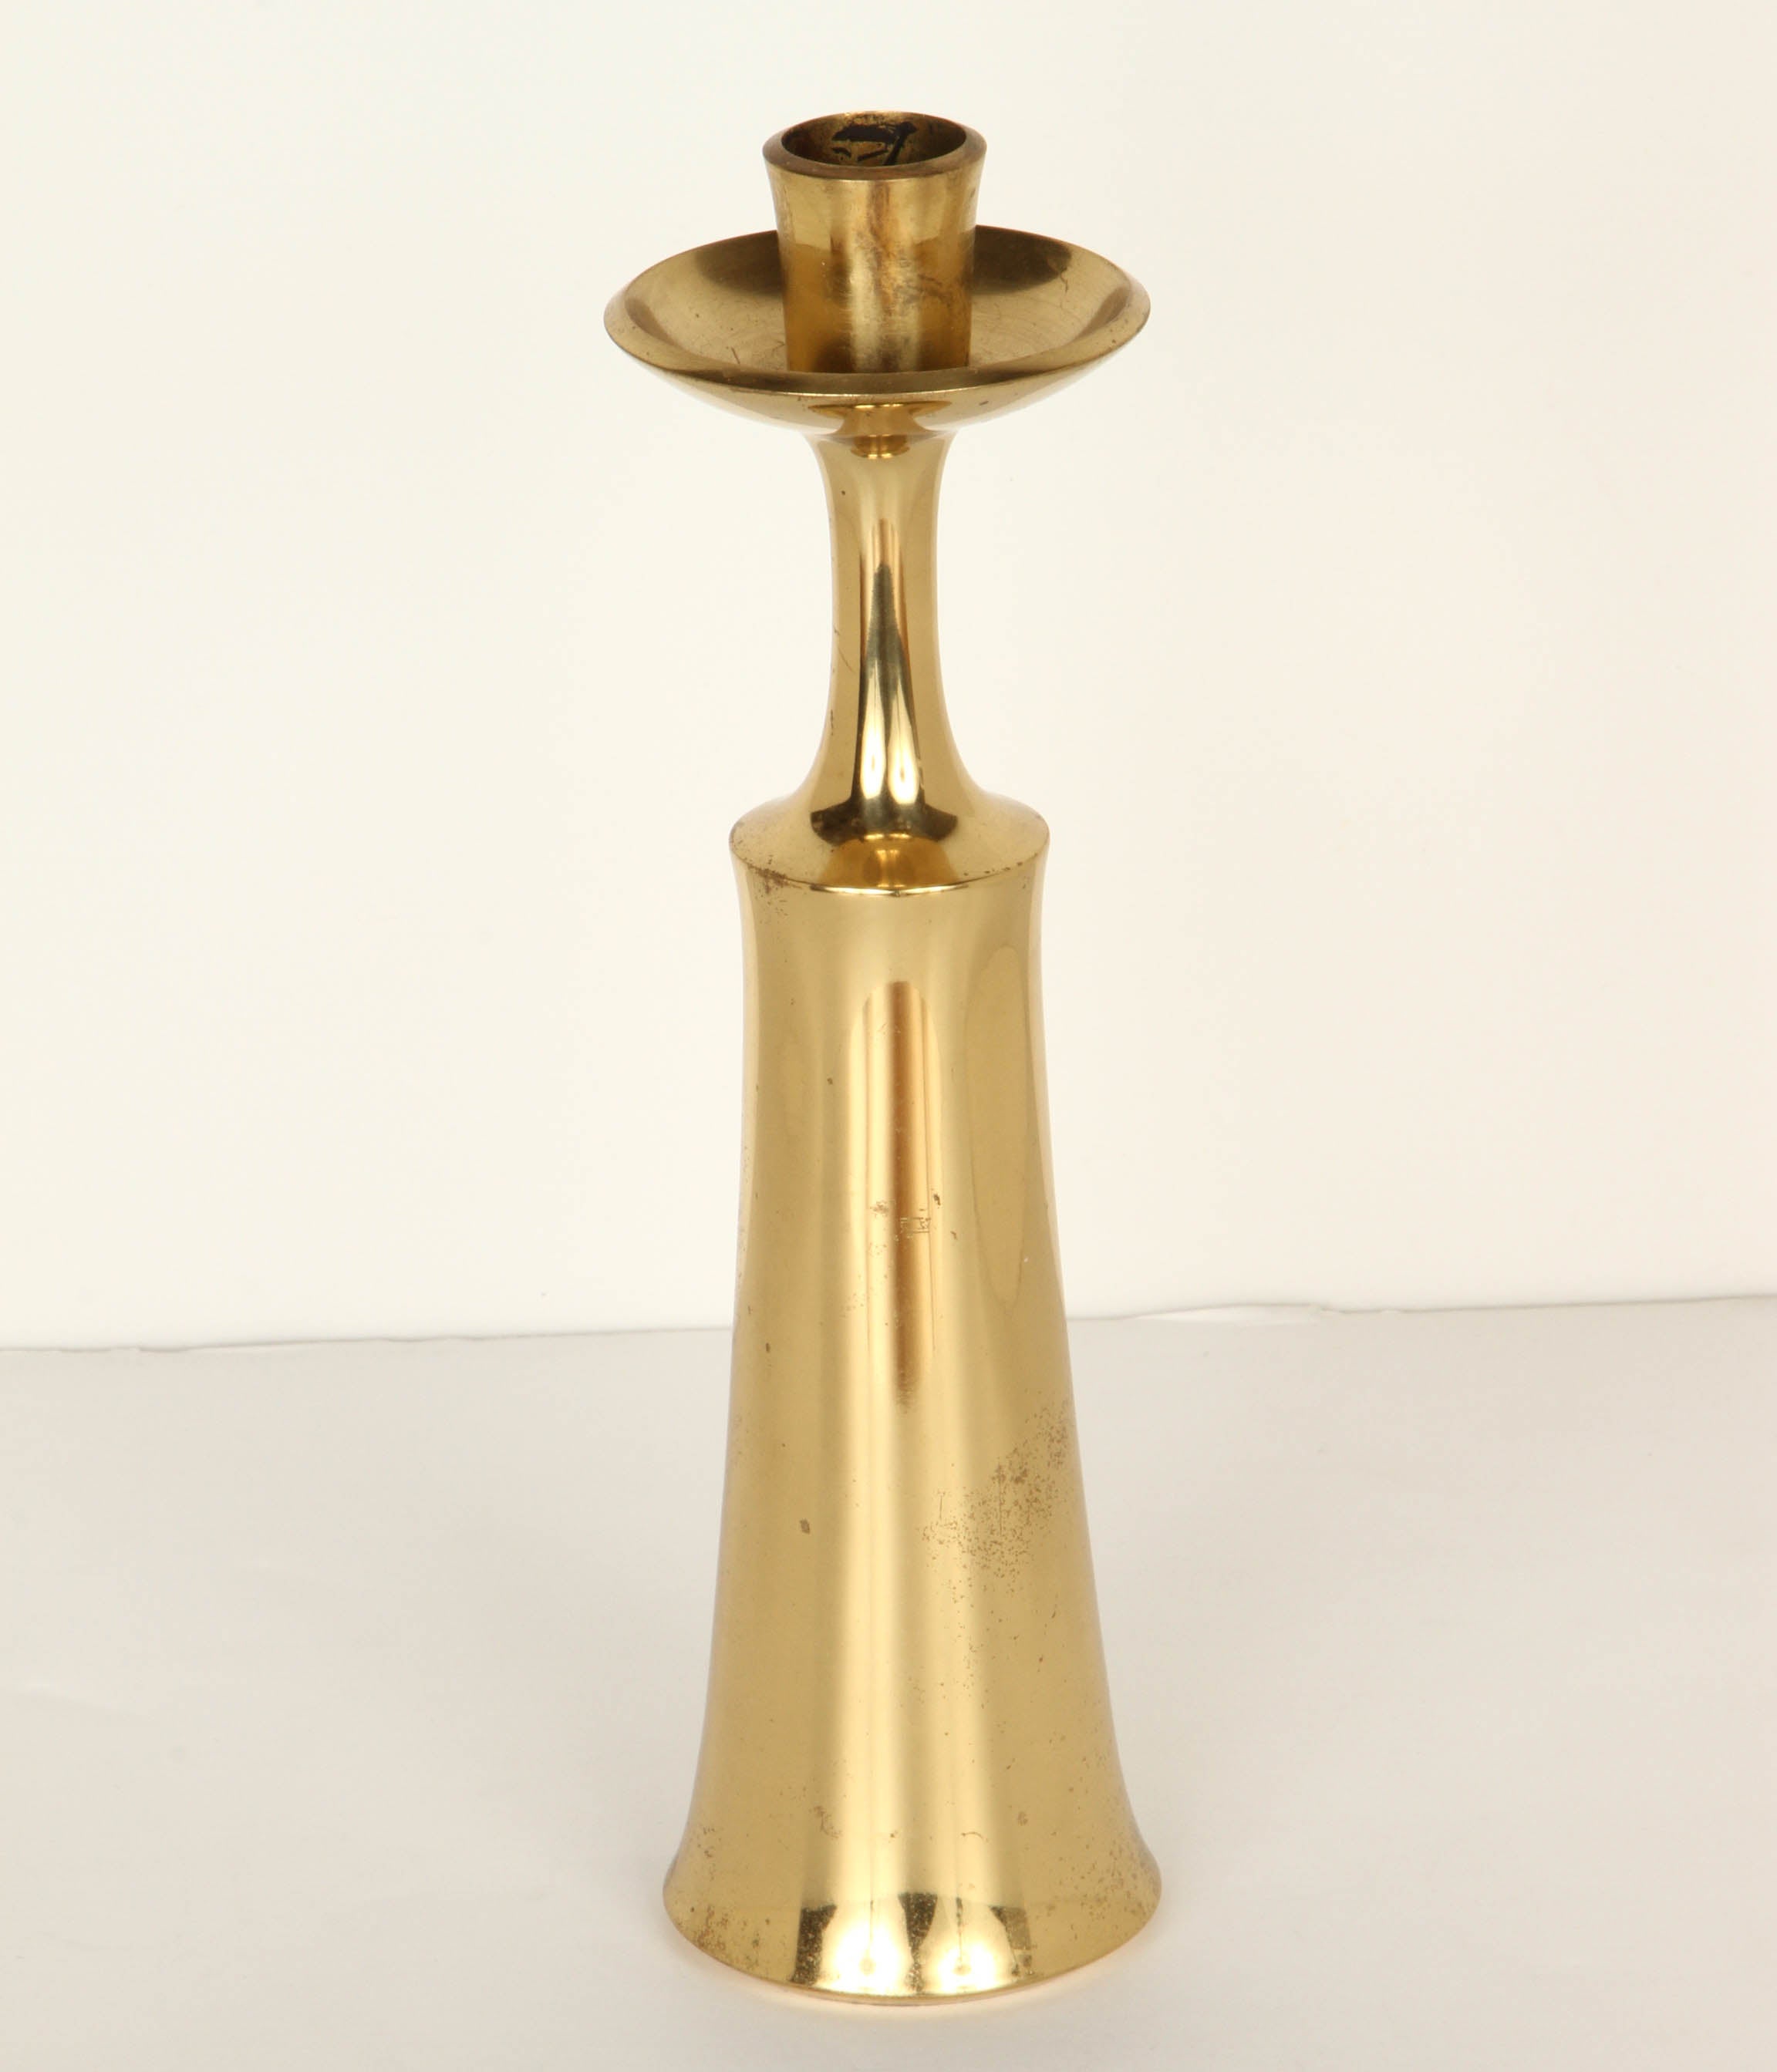 A pair of 1950s Jens Quistgaard brass candlesticks for Dansk. One of his most noteworthy and iconic designs. Quintessentially Danish modern in its execution and inherent aesthetics.